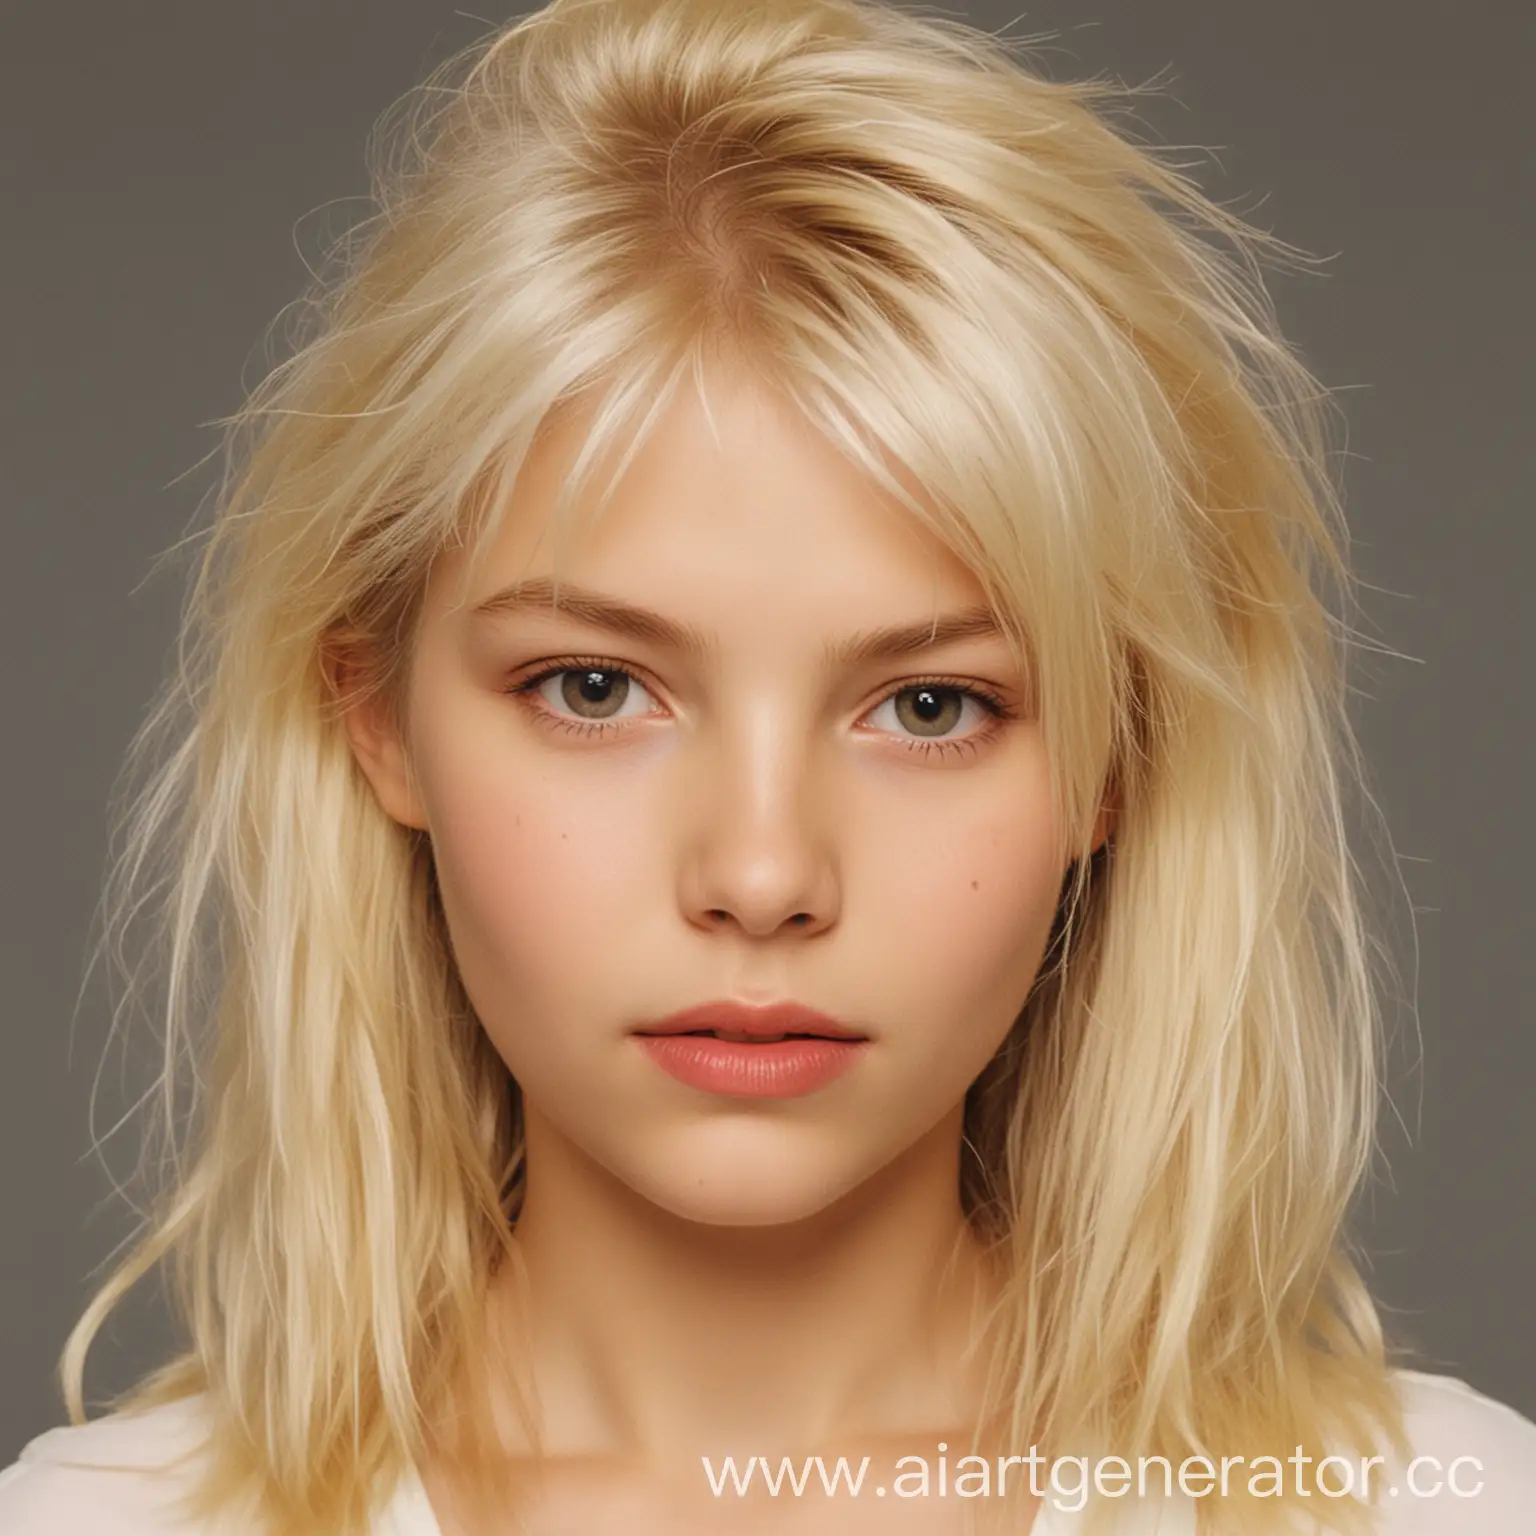 Adolescent-Girl-with-Blonde-Hair-at-14-Years-Old